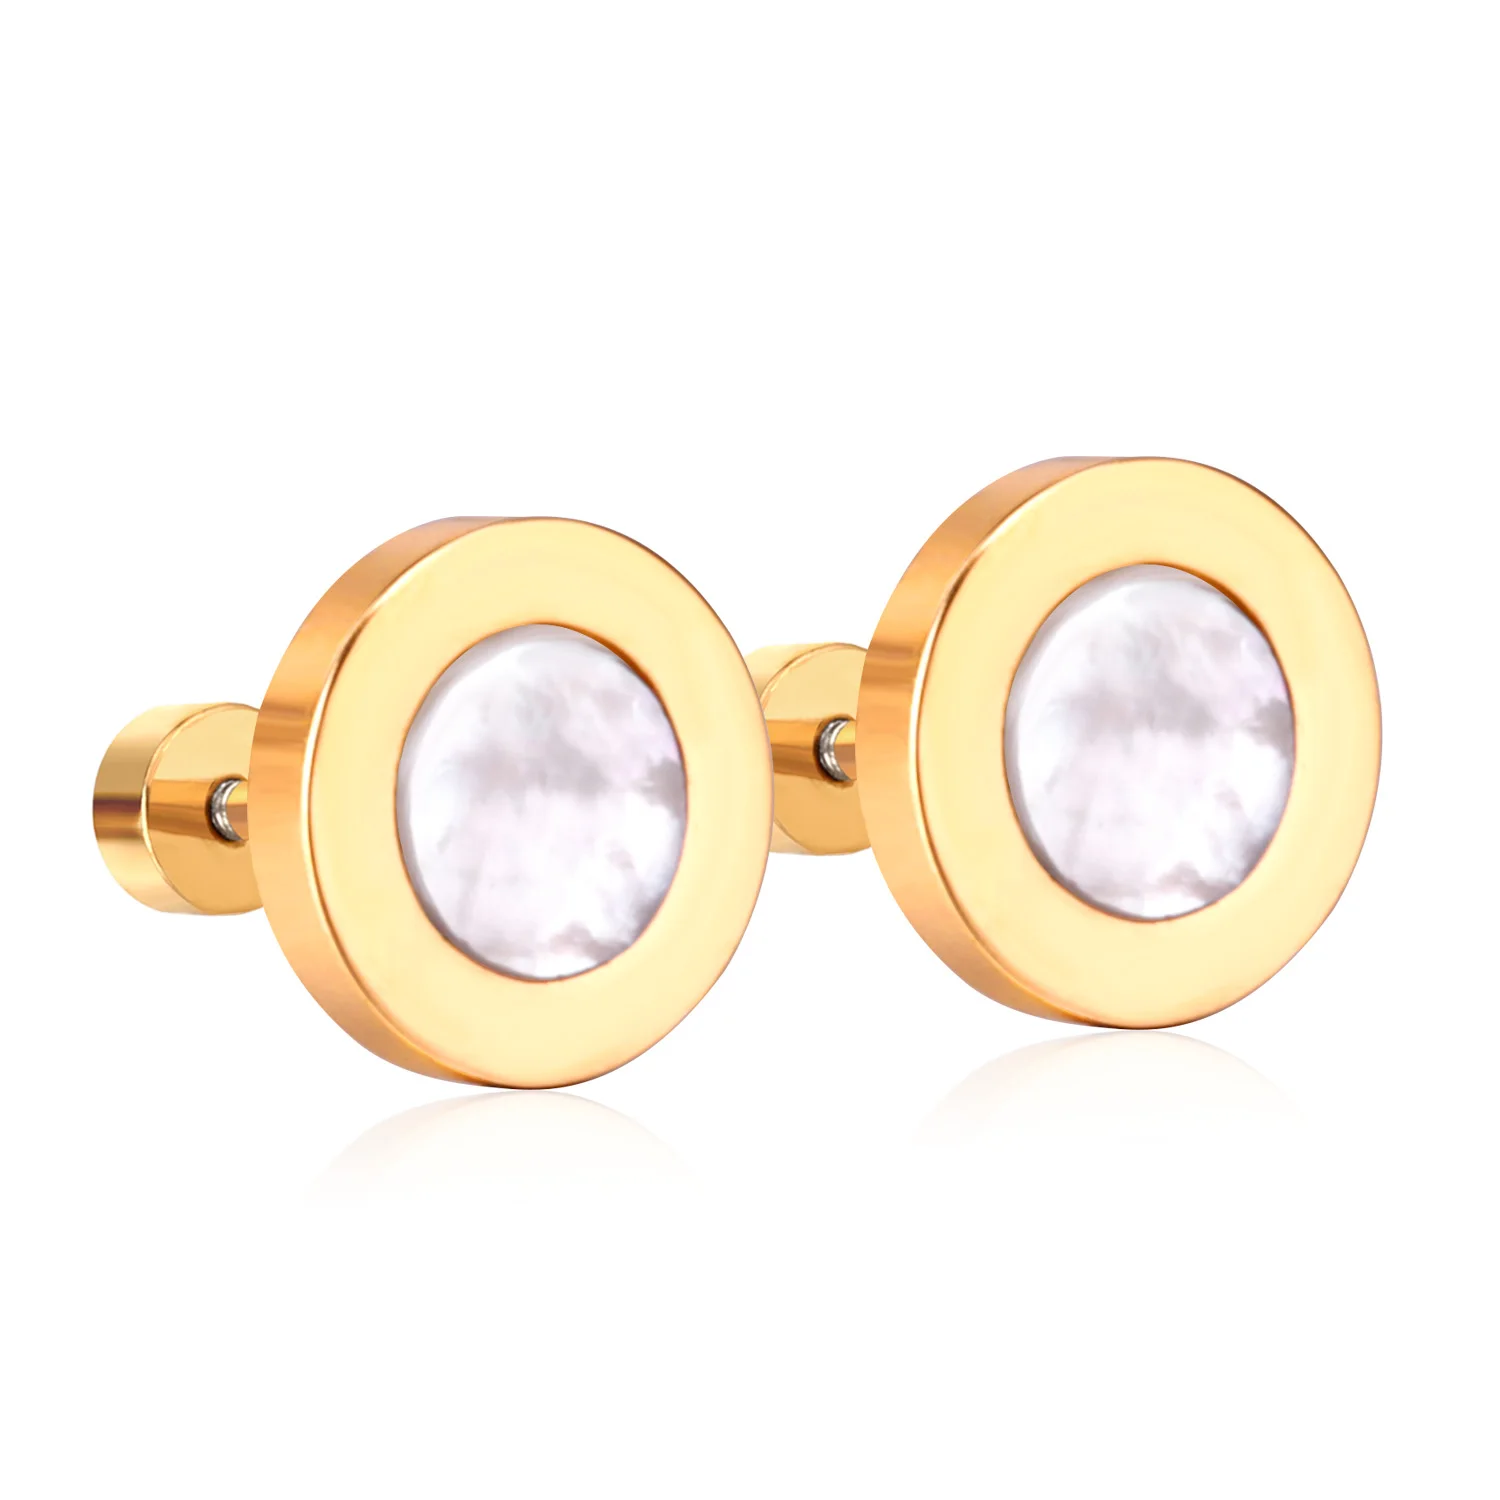 

2020 Ason stud earrings stainless steel jewelry design for women and girls in wholesale price 18k gold stud earrings